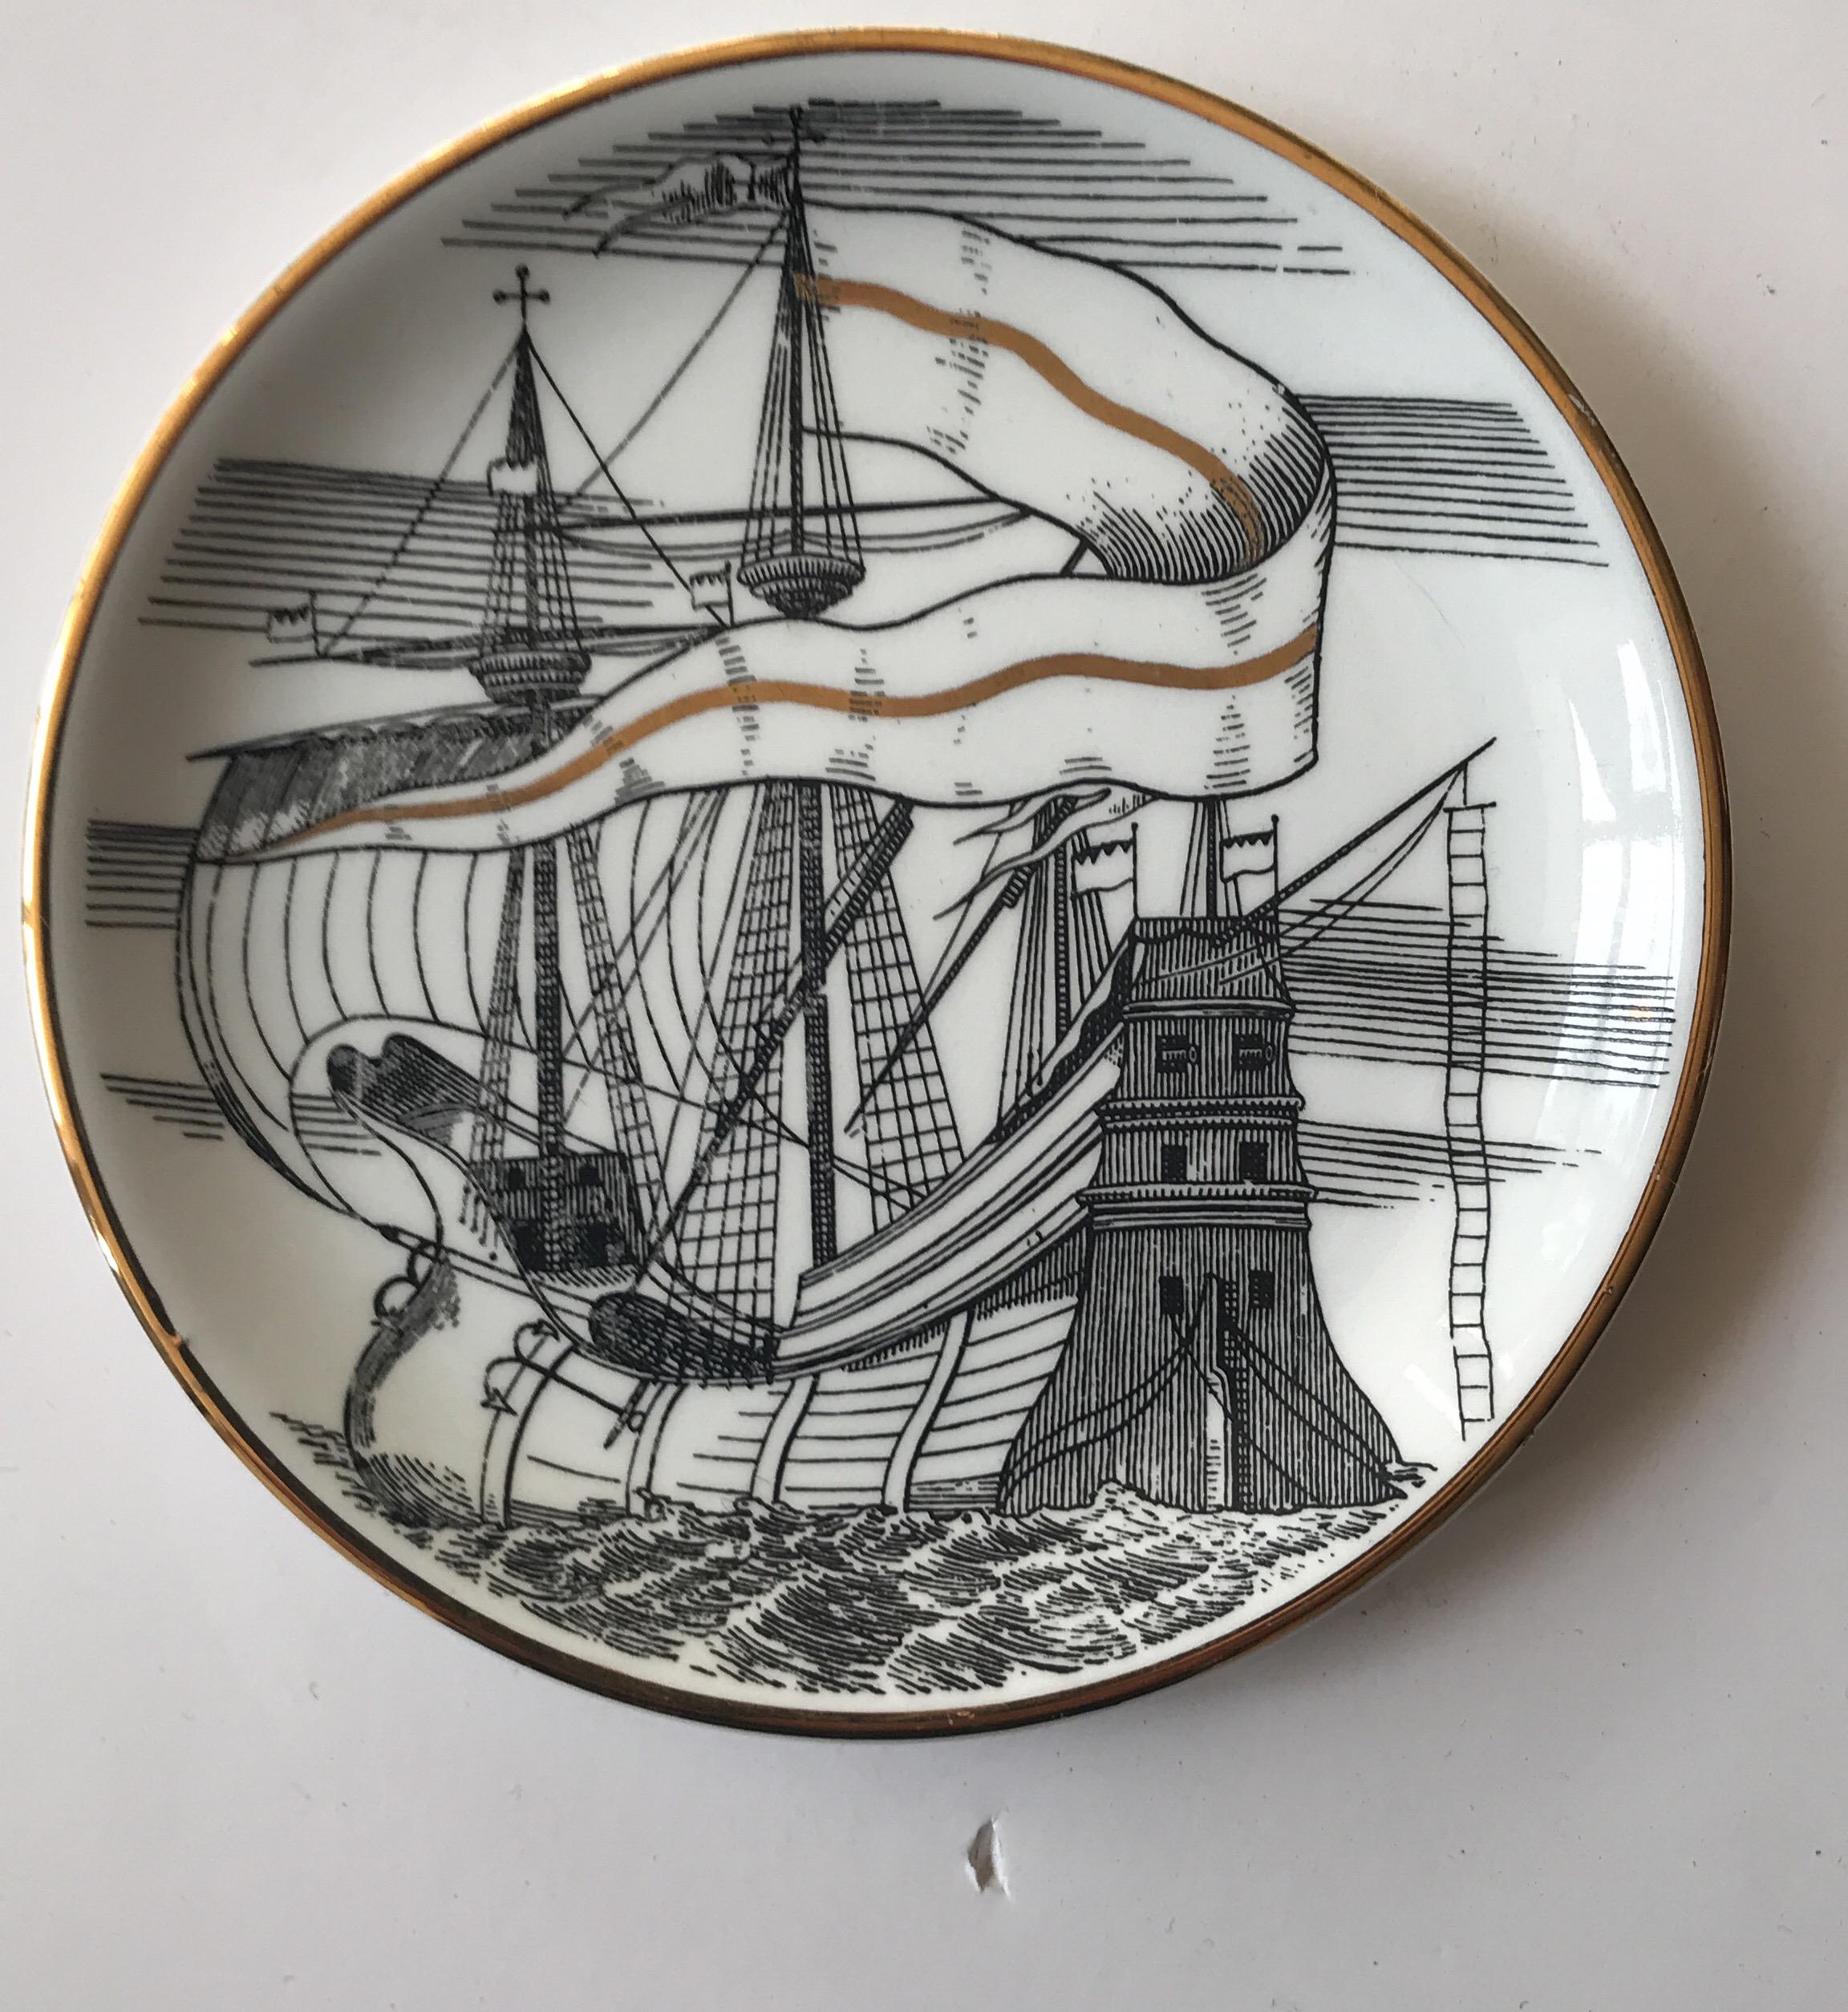 Set of five beautiful Piero Fornasetti Italian porcelain coaster depicting Spanish galleons or ships.
Each is different. The coasters were made exclusively for Bonwit Teller. The reverse of each is printed with the Fornasetti Milano mark.
Great as